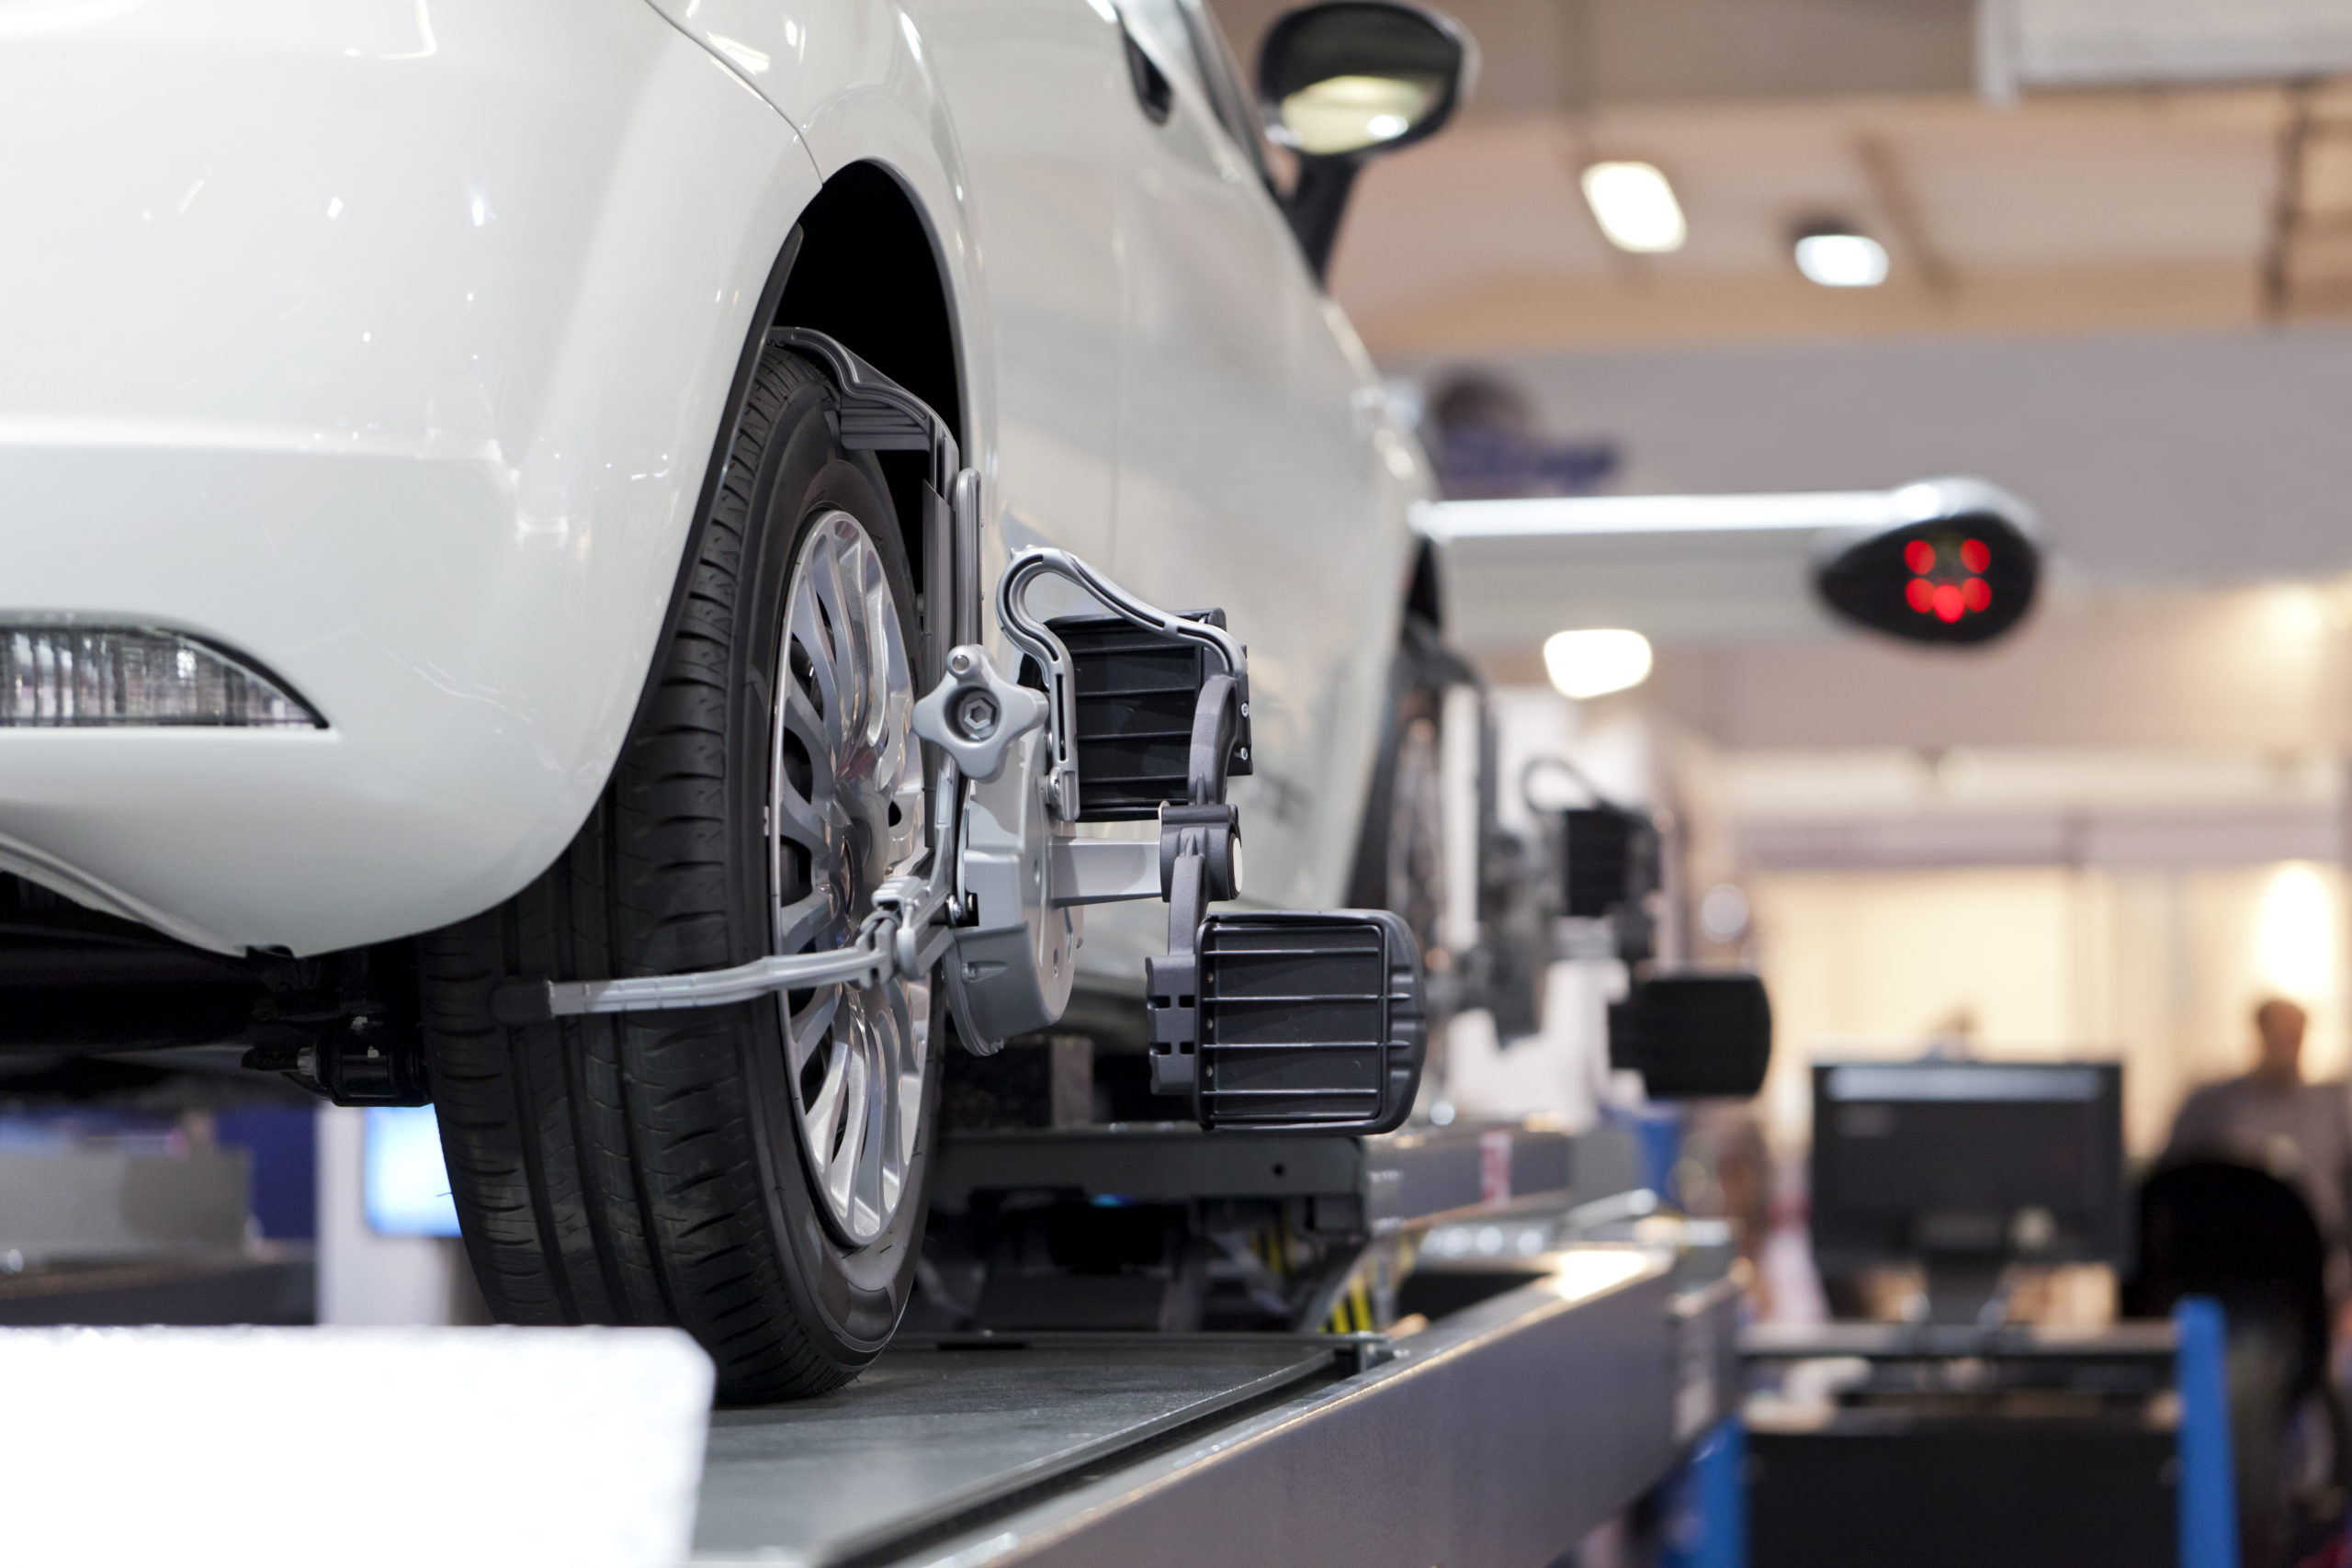 Wheel Alignment Checks are complimentary at Family Auto Service